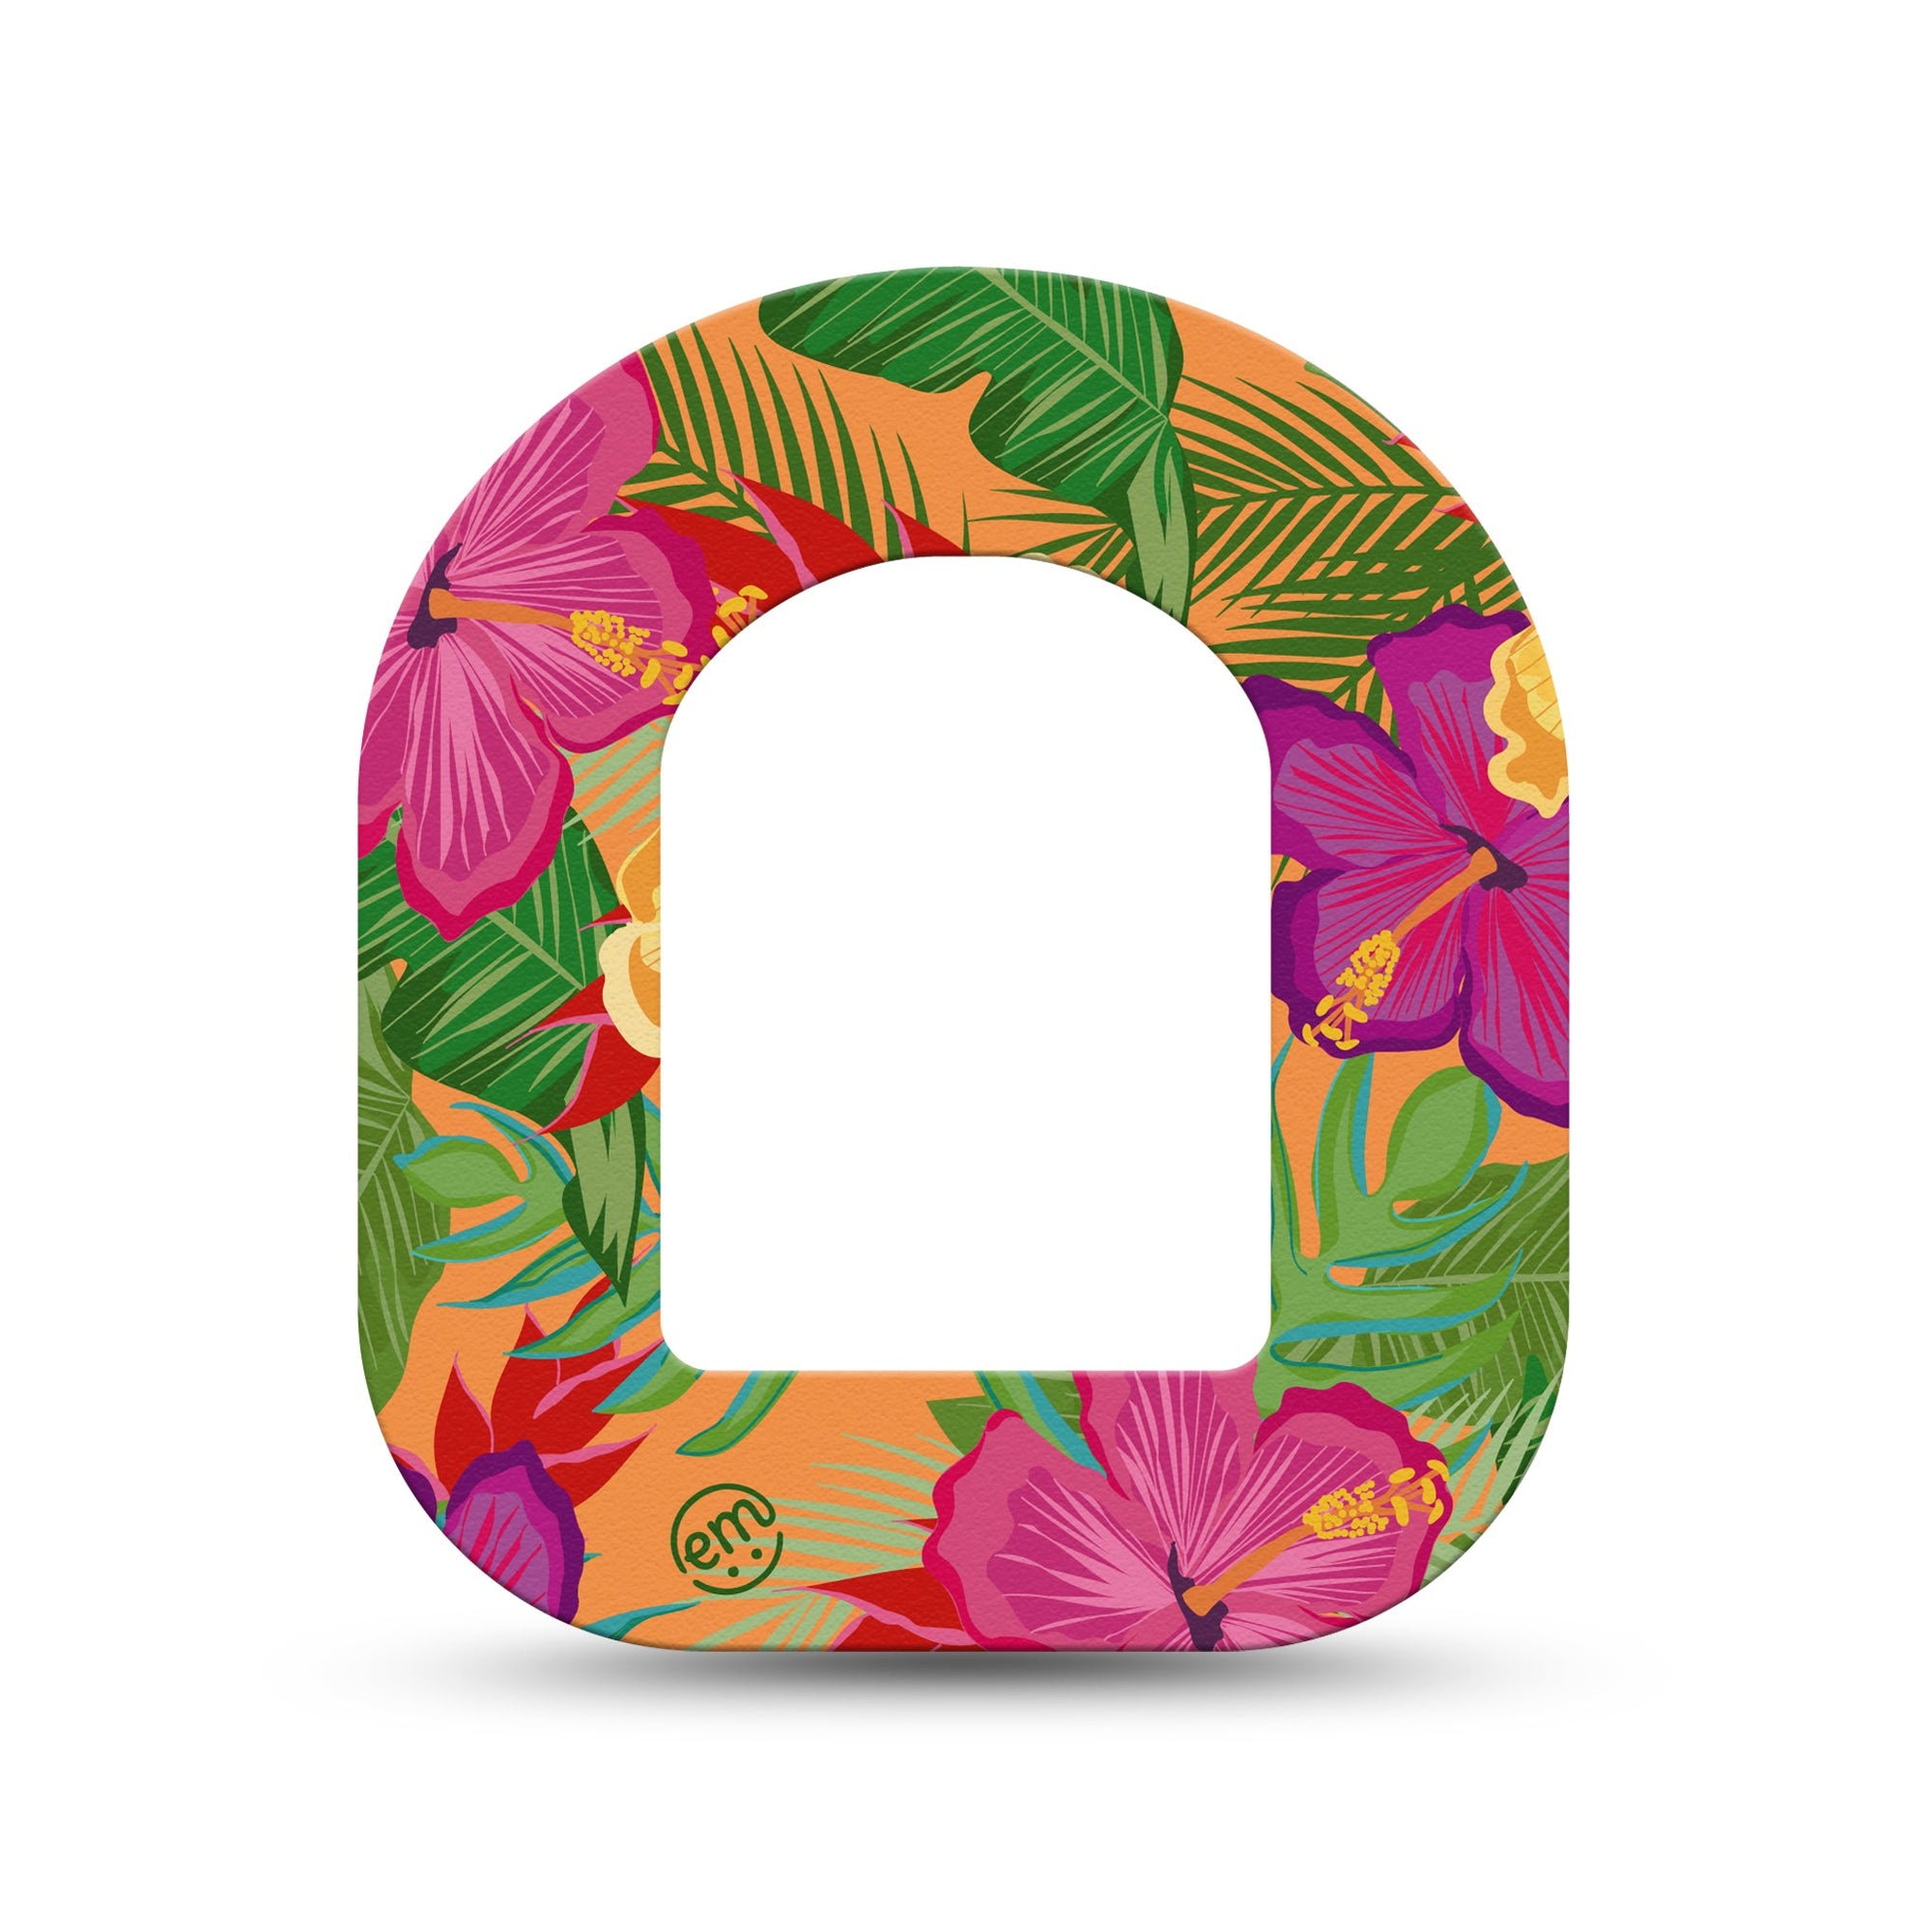 ExpressionMed Bright Hibiscus Pod Mini Tape Single, Tropical Flowers Adhesive Tape Pump Design